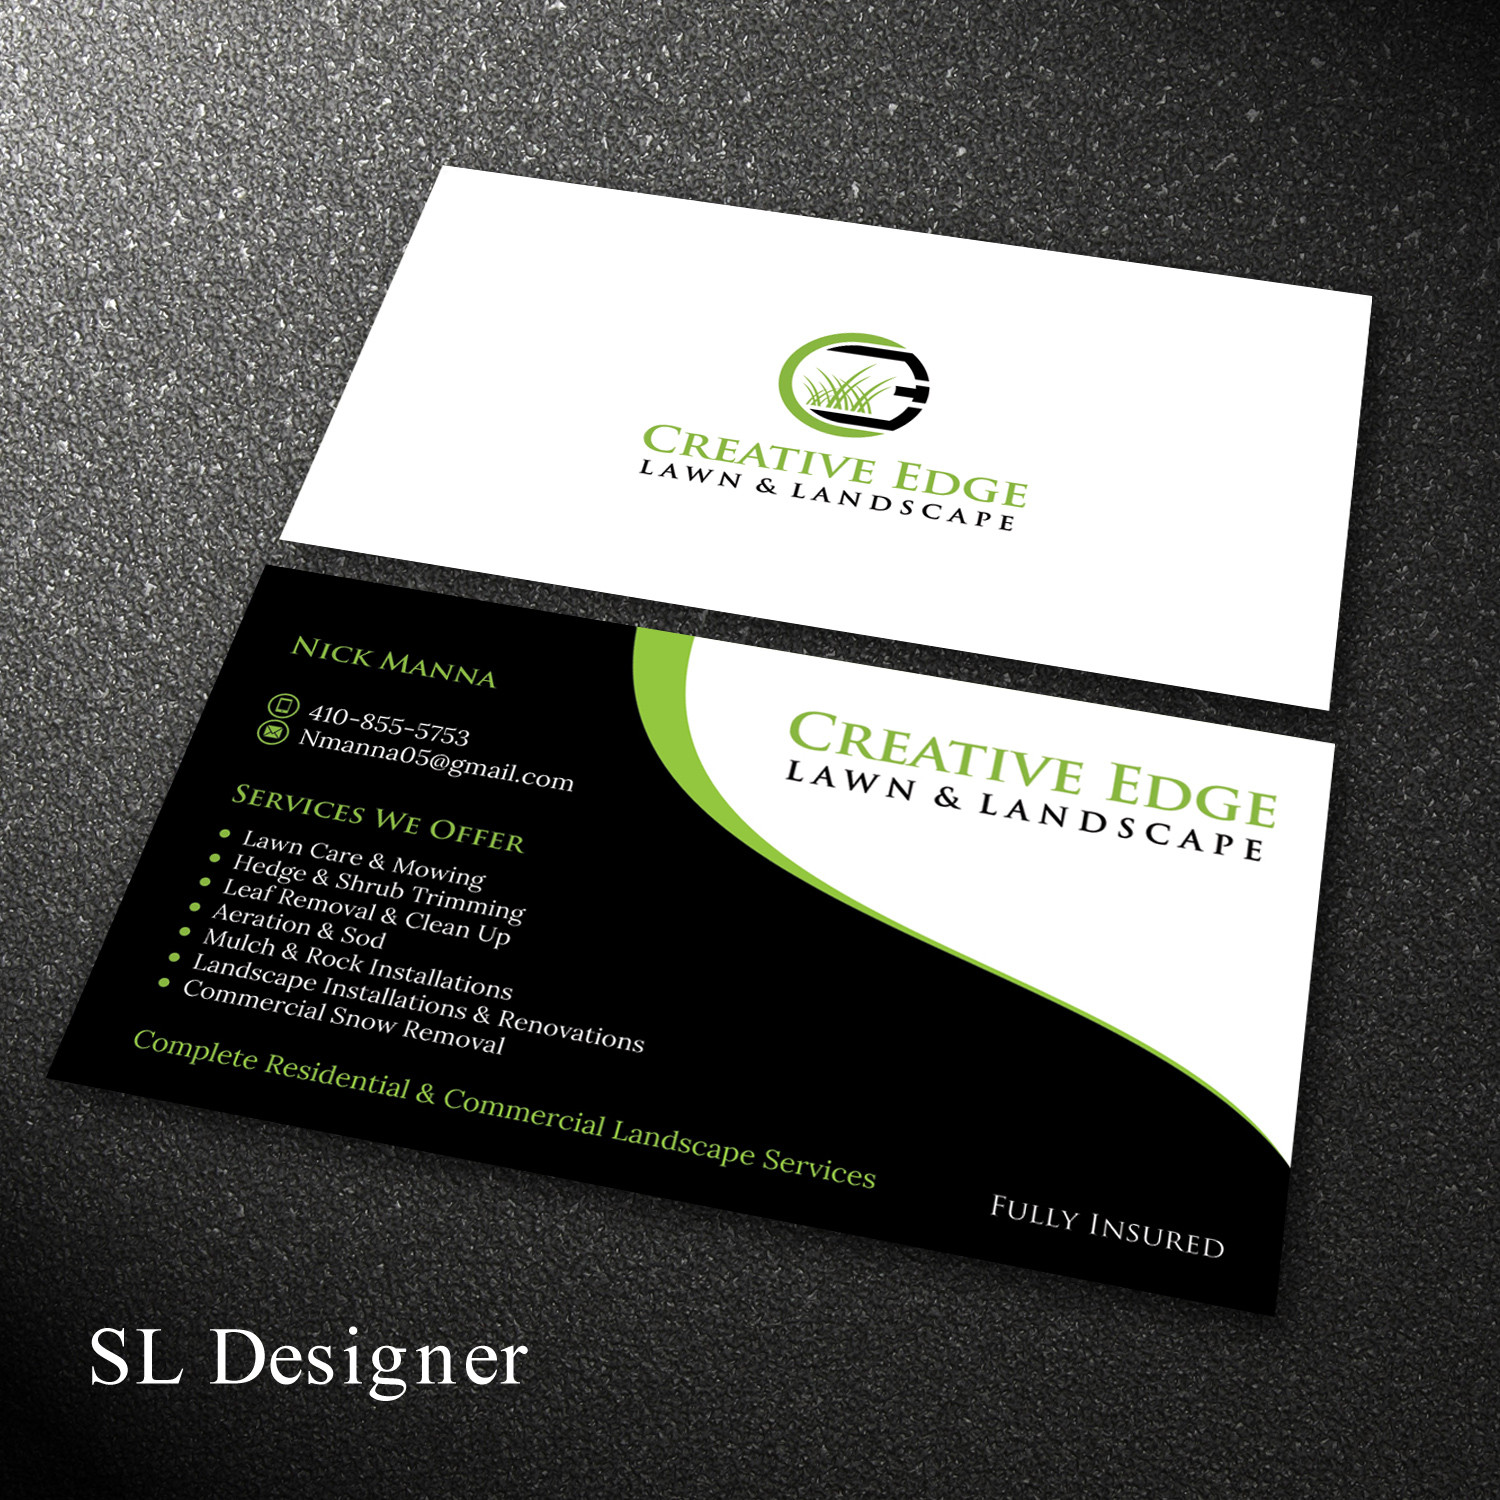 Landscaping Business Cards Templates Free Sample Kit Maker Of Online Business Card Template Free